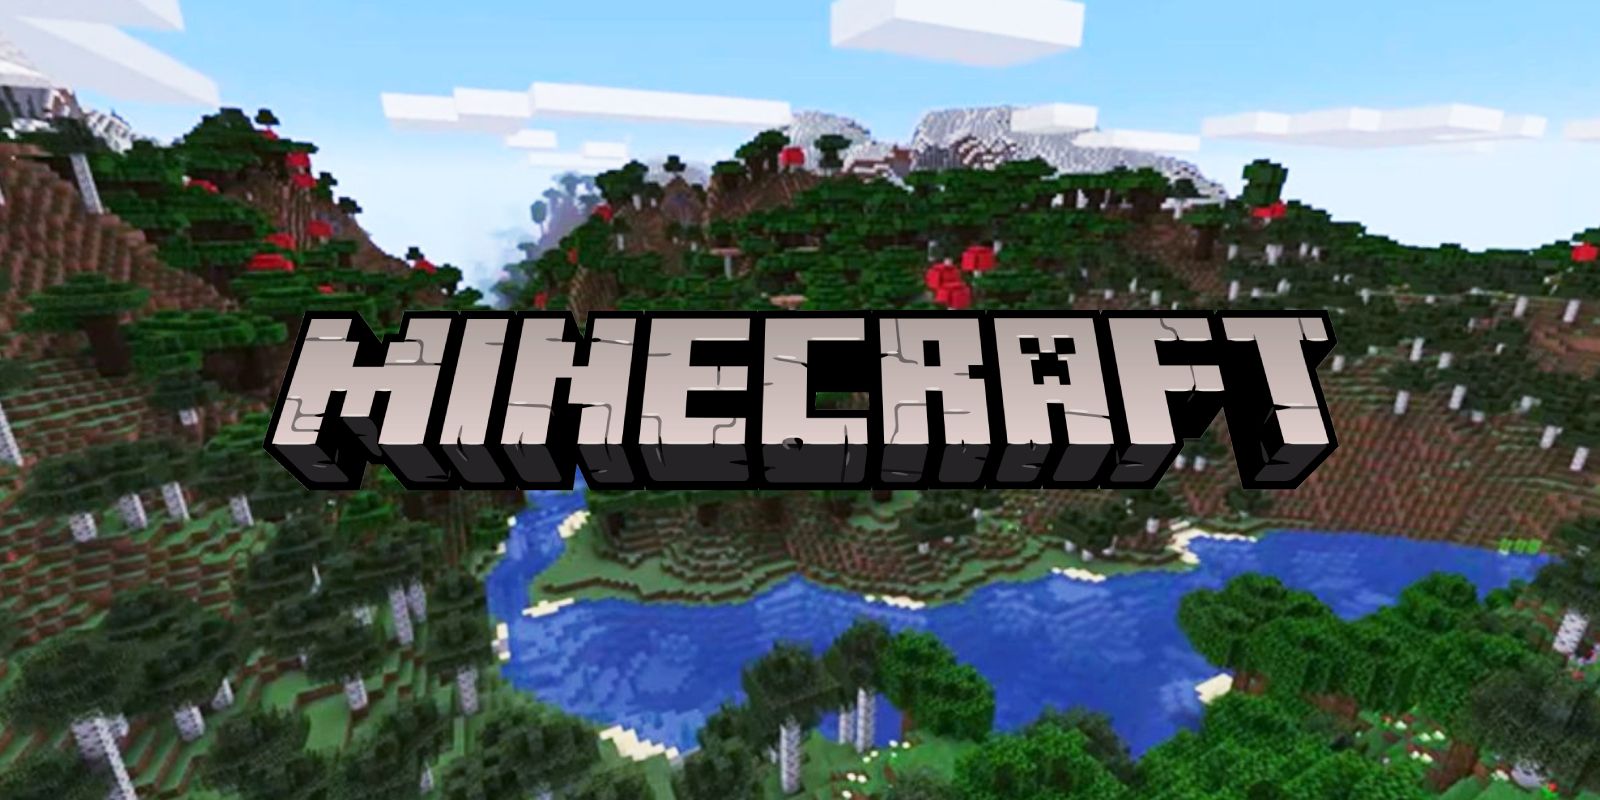 The Minecraft logo over an image of the Stony Peaks Biome